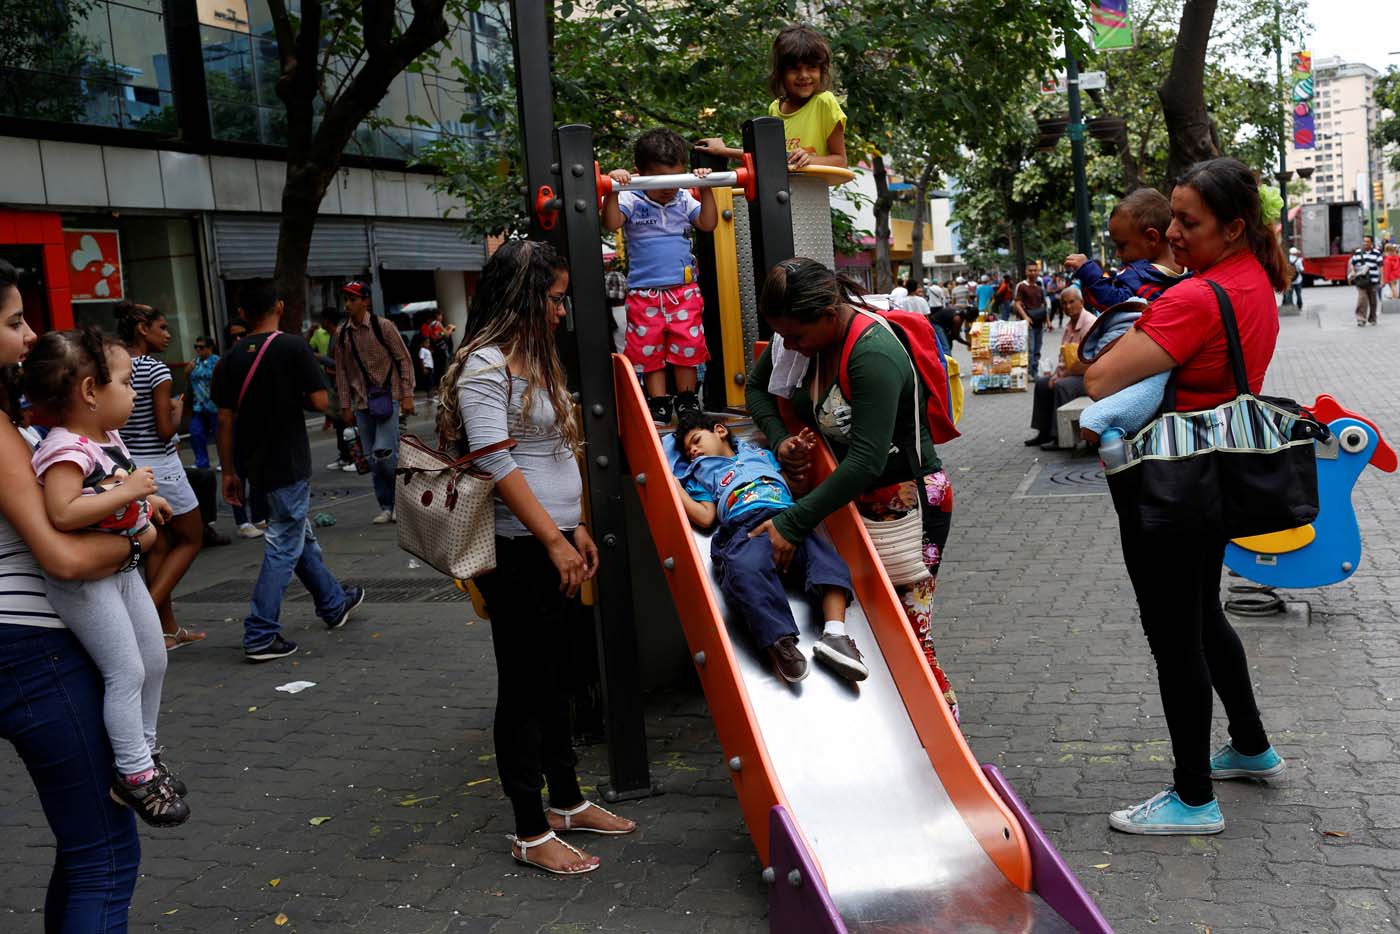 Tatiana Rocha (C), plays with her son Kaleth Heredia, 2, a neurological patient being treated with anticonvulsants, at a park in Caracas, Venezuela February 10, 2017. REUTERS/Carlos Garcia Rawlins   SEARCH "EPILEPSY CARACAS" FOR THIS STORY. SEARCH "WIDER IMAGE" FOR ALL STORIES.